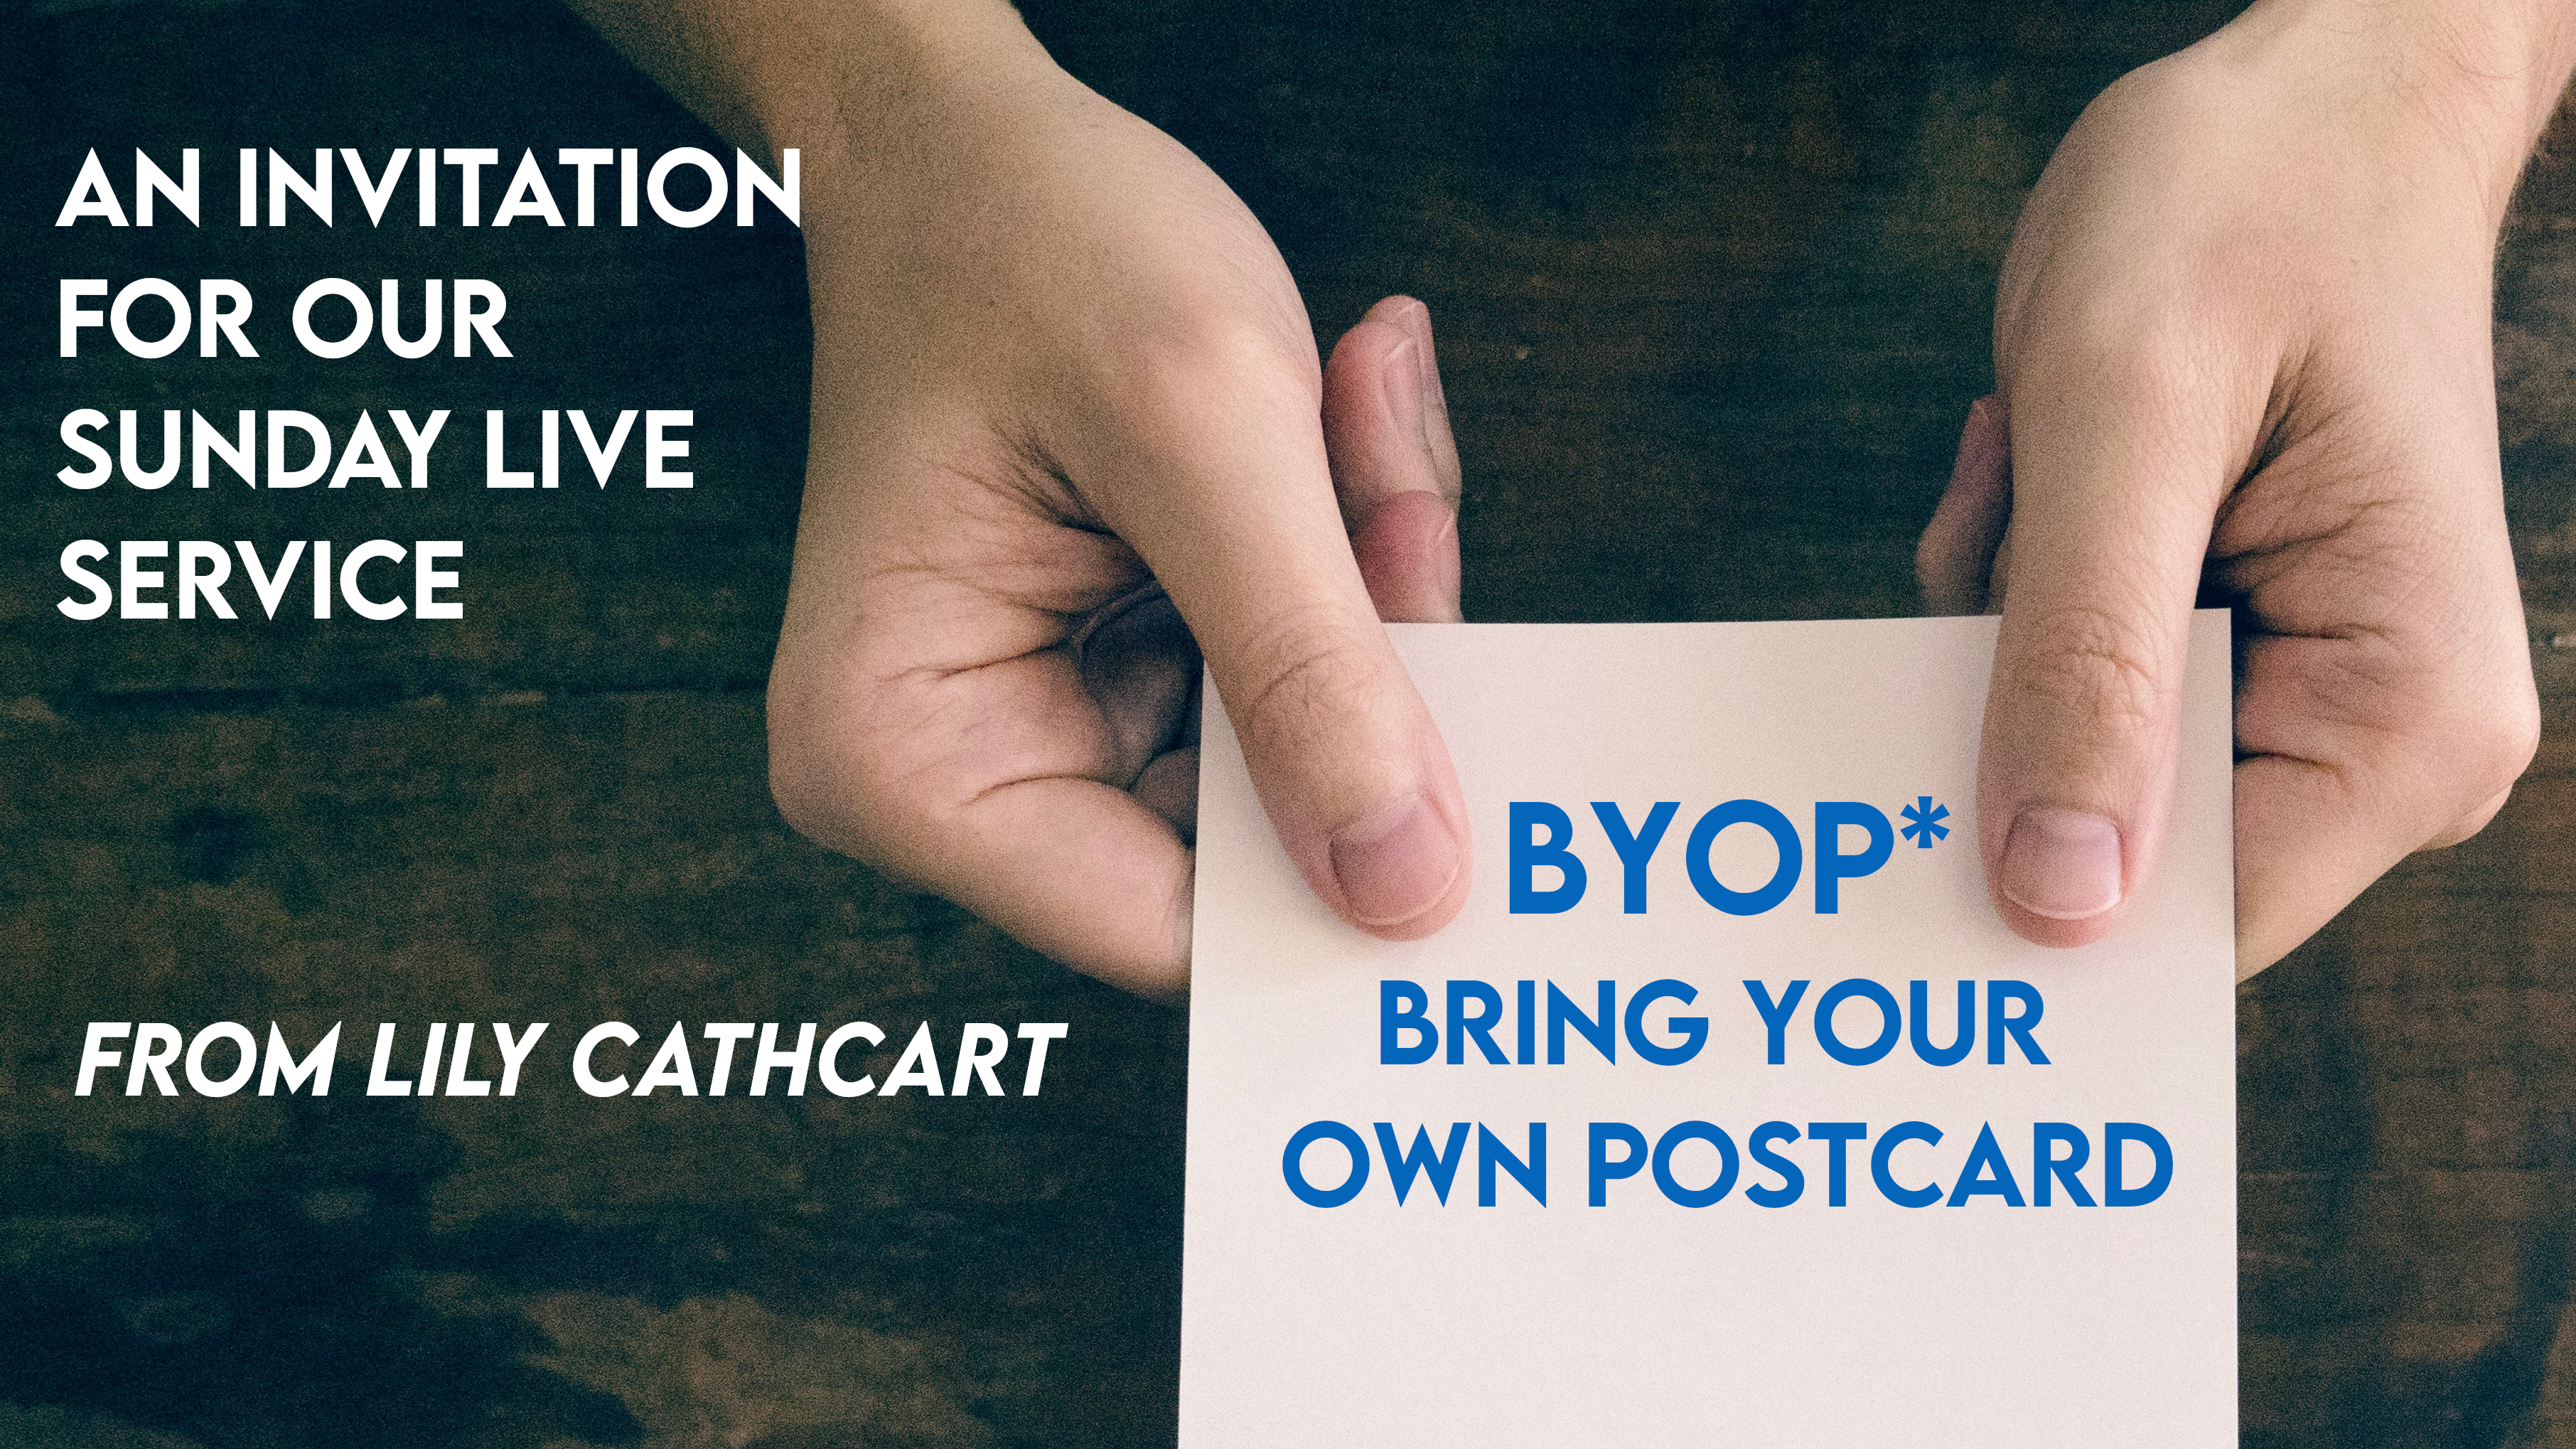 BYOP Bring your own postcard!